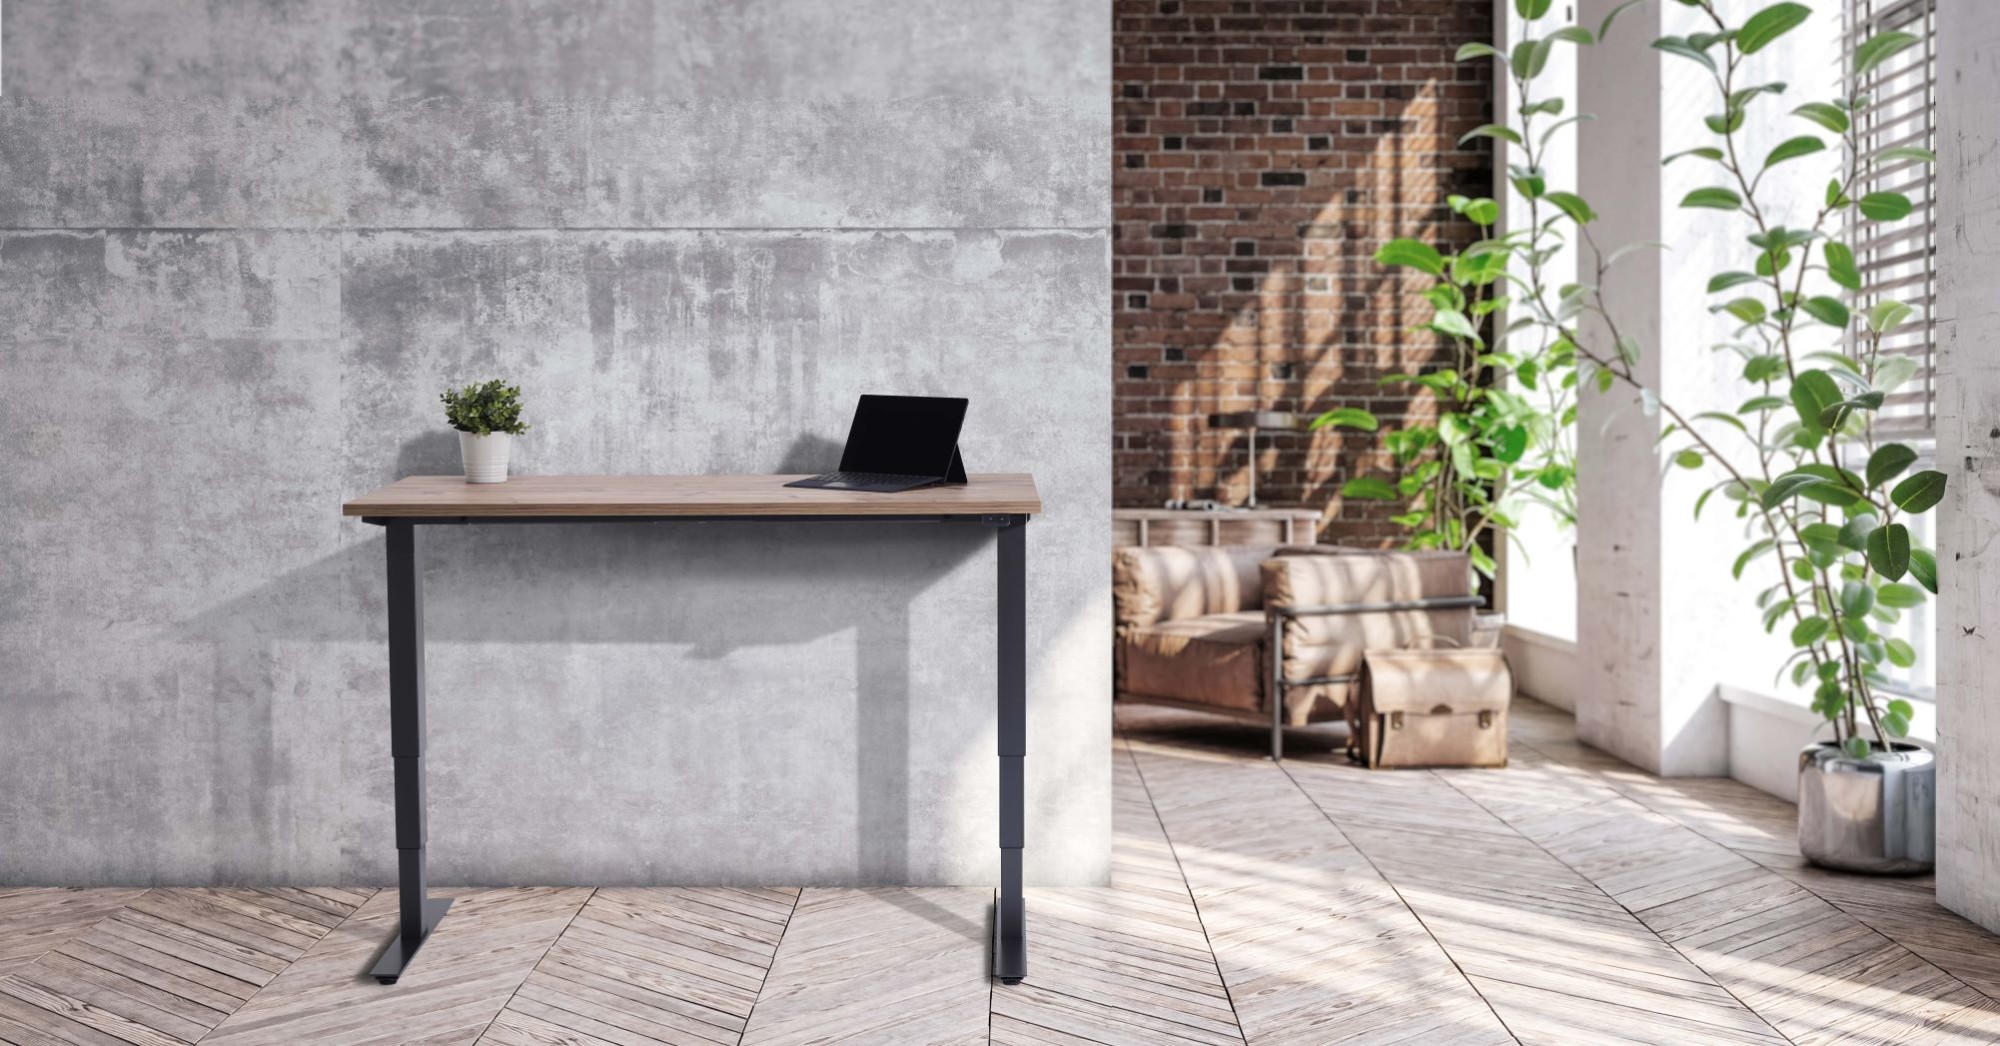 The Buro Range is manufactured in the UK and Sweden using 25% recycled steel, FSC-certified sustainable wood tops and responsibly sourced materials, designed, and tested for 40 years of use.